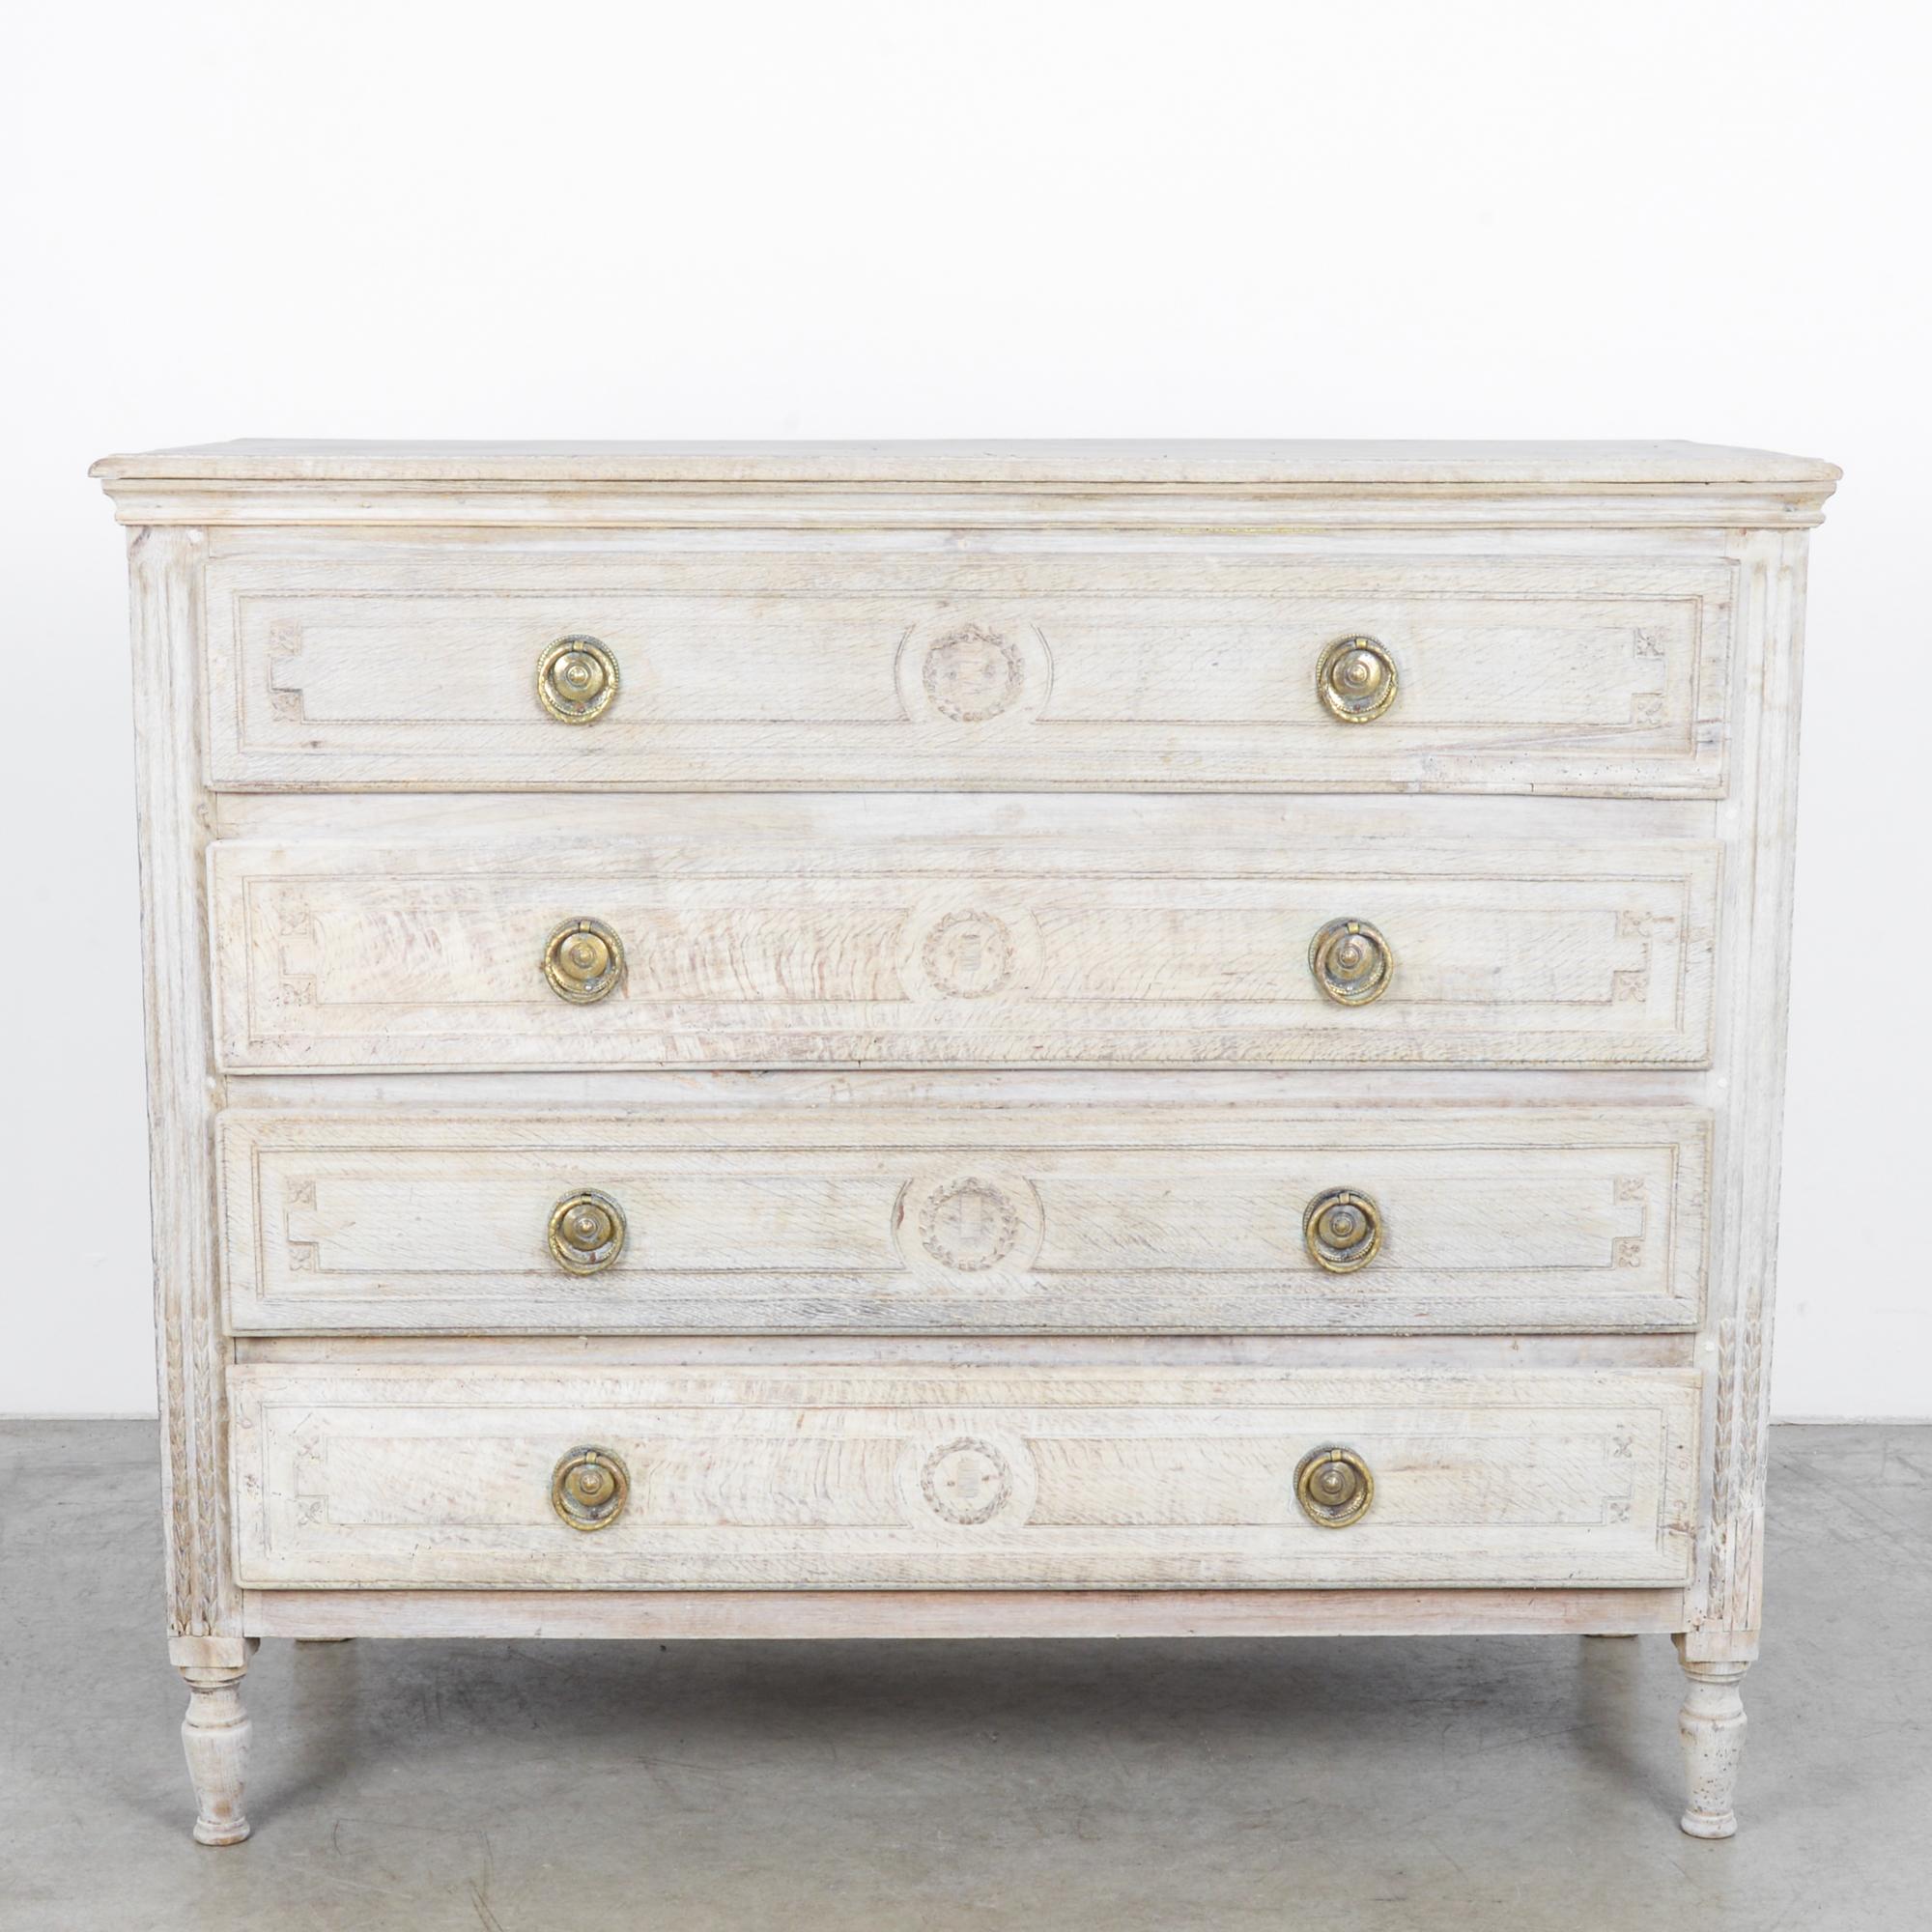 This oak chest of drawers was made in France, circa 1820. It houses four drawers, each with a carved wreath between decorative brass ring pulls. The drawers are slightly elevated, standing on angular rear legs and turned front legs. With the fine